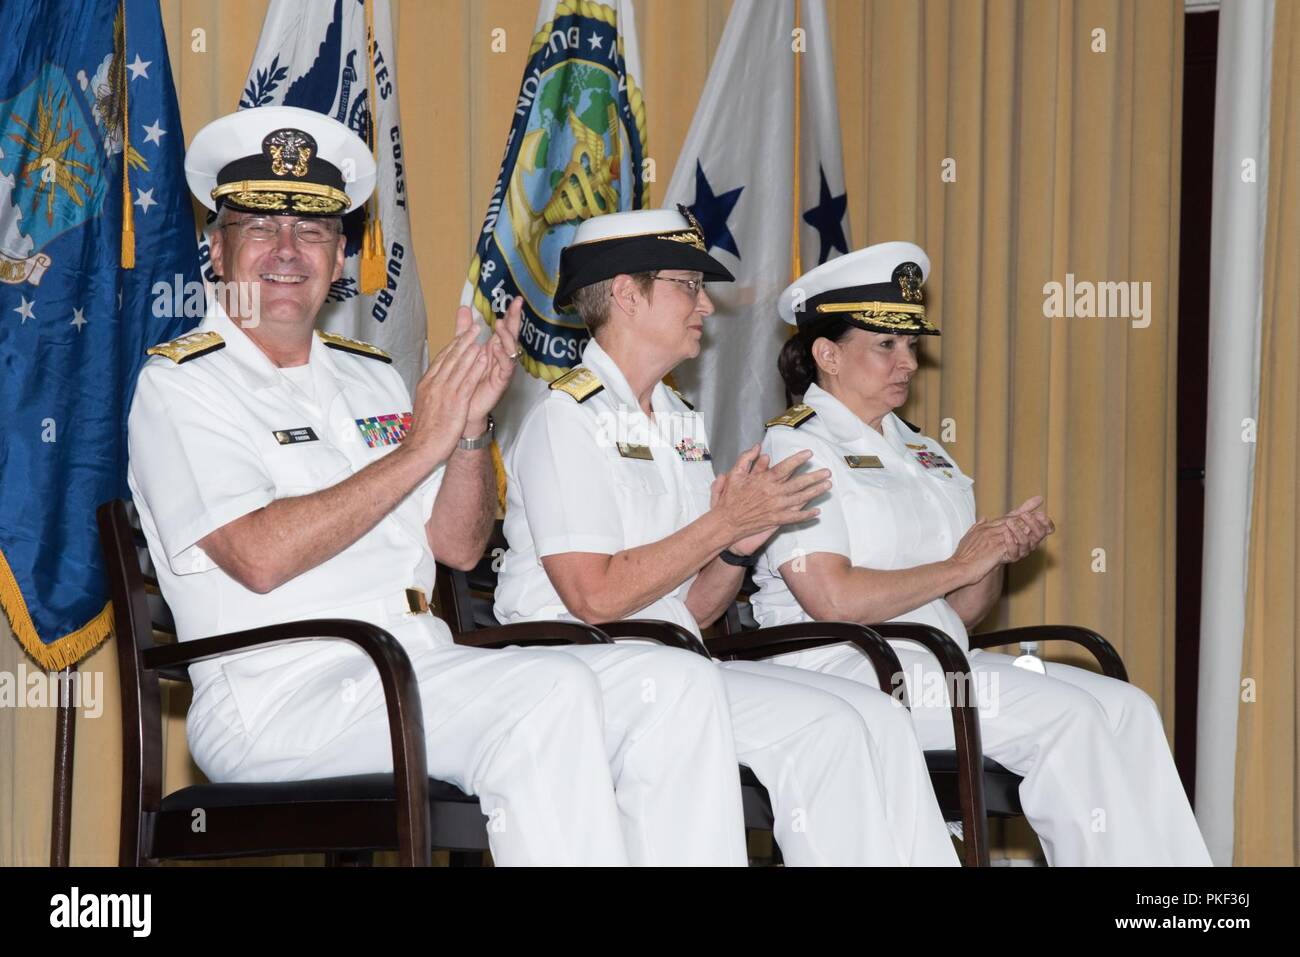 Rear Admiral Tina Davidson, Nurse Corps, U.S.Navy, assumes command of the Navy Medicine Education, Training and Logistics Command from Rear Admiral Rebecca McCormick-Boyle at Joint Base San Antonio-Fort Sam Houston, Texas, Aug. 3, 2018. Vice Admiral C. Forrest Faison, III, surgeon general of the Navy, officiated the time honored ceremony. Stock Photo